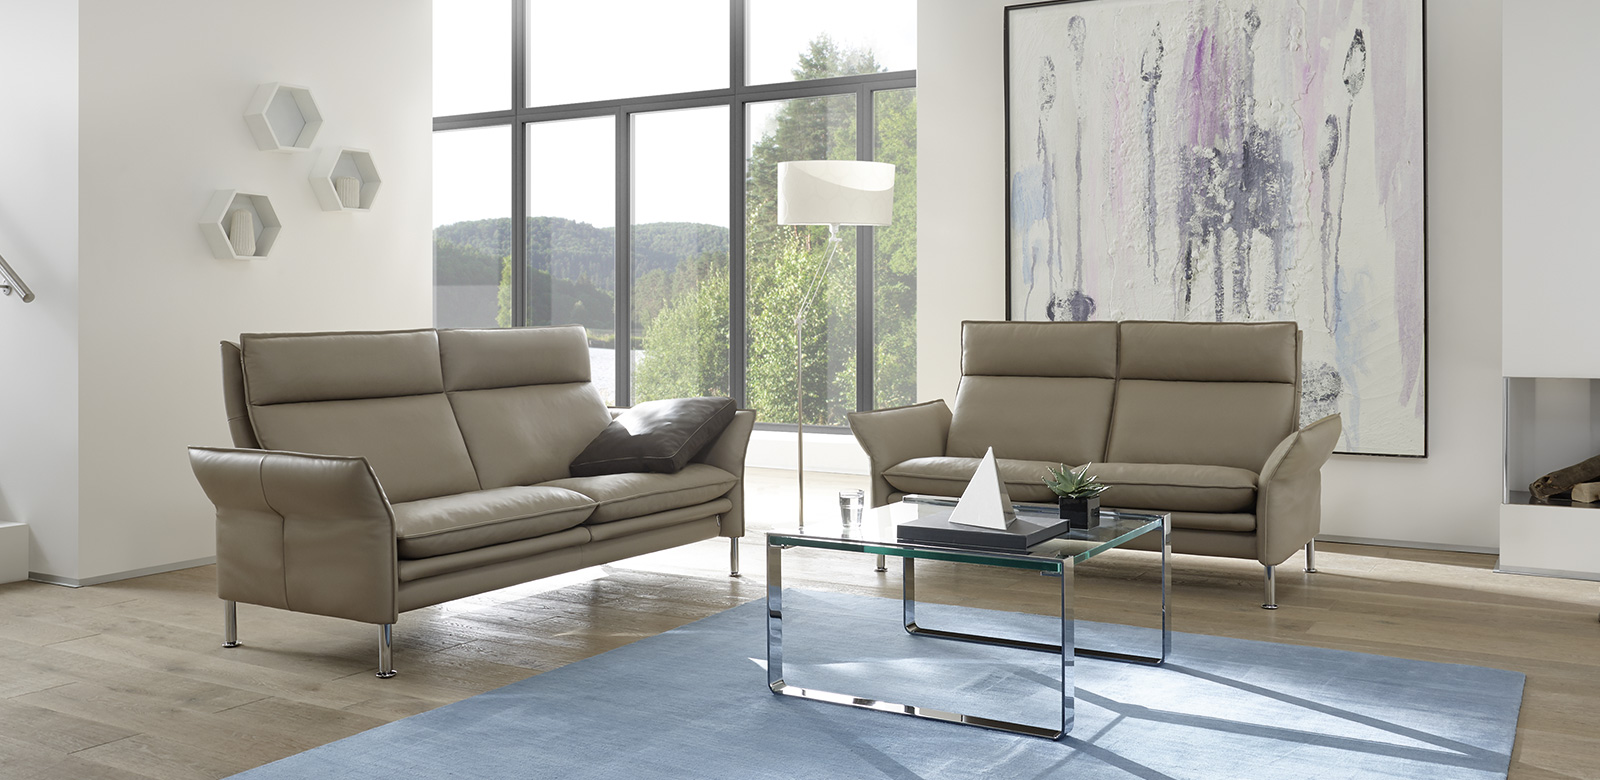 Porto seating group consisting of two sofas in beige leather in a modern villa by the lake.